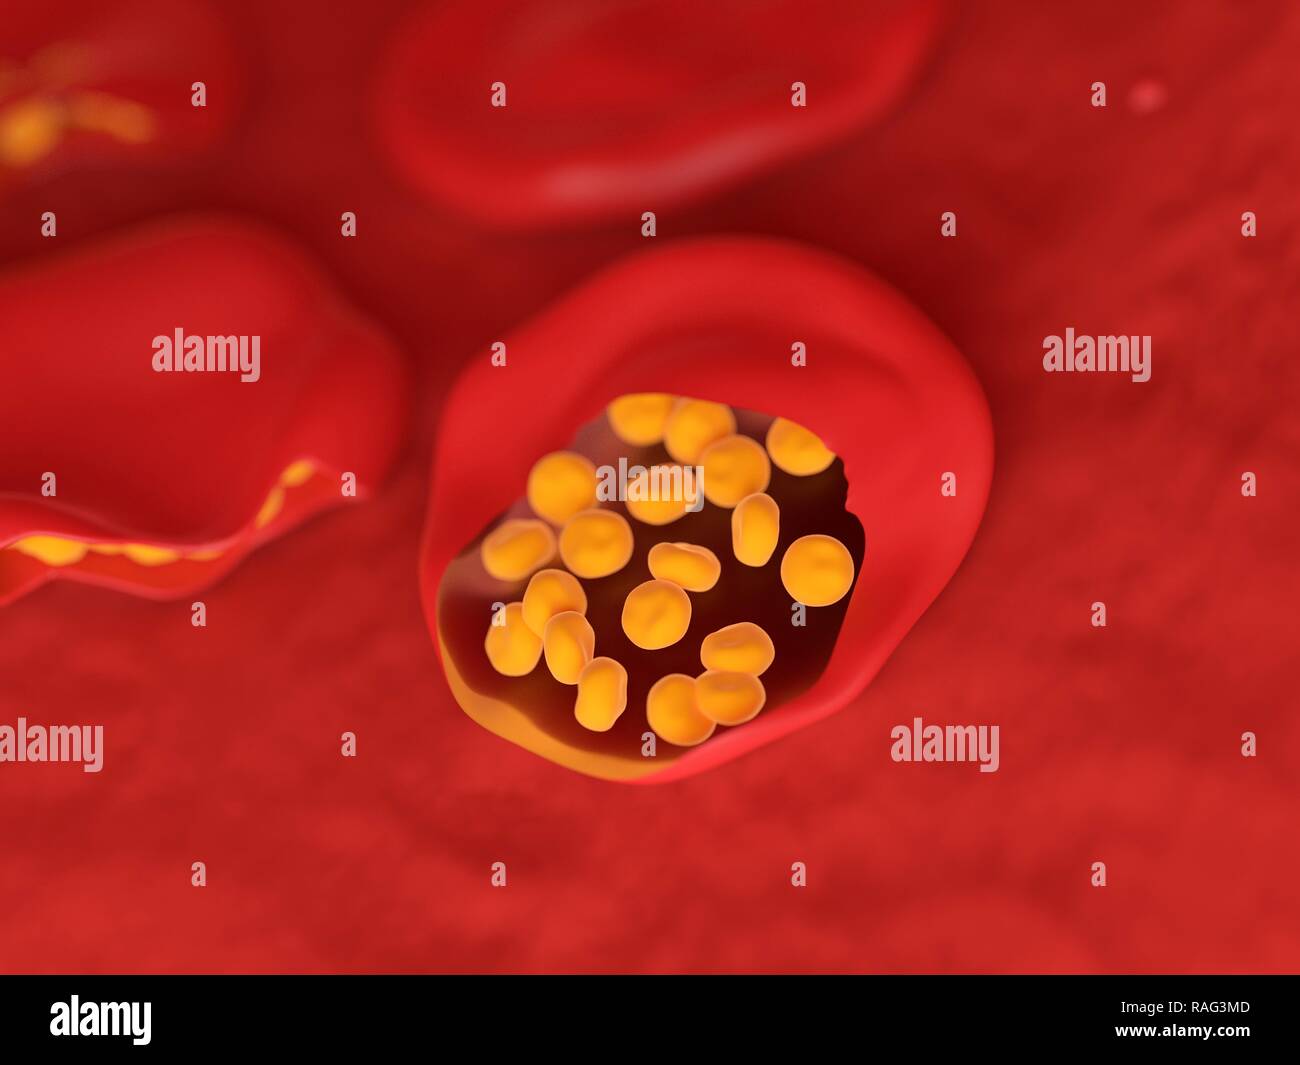 Illustration of malaria infected blood cells. Stock Photo